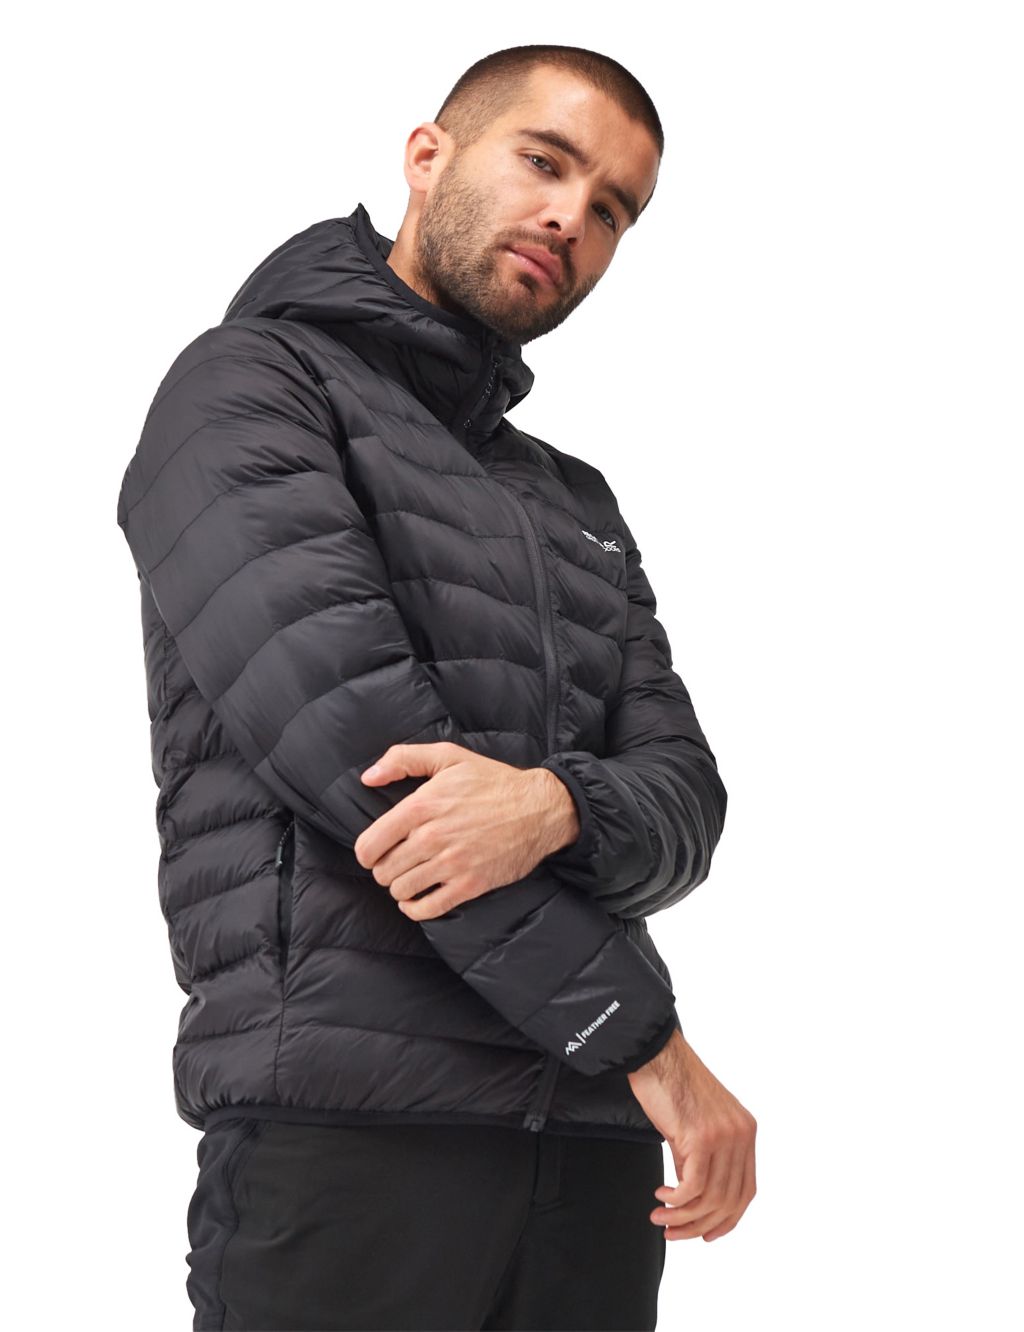 Marizion Water-Repellent Puffer Jacket image 5